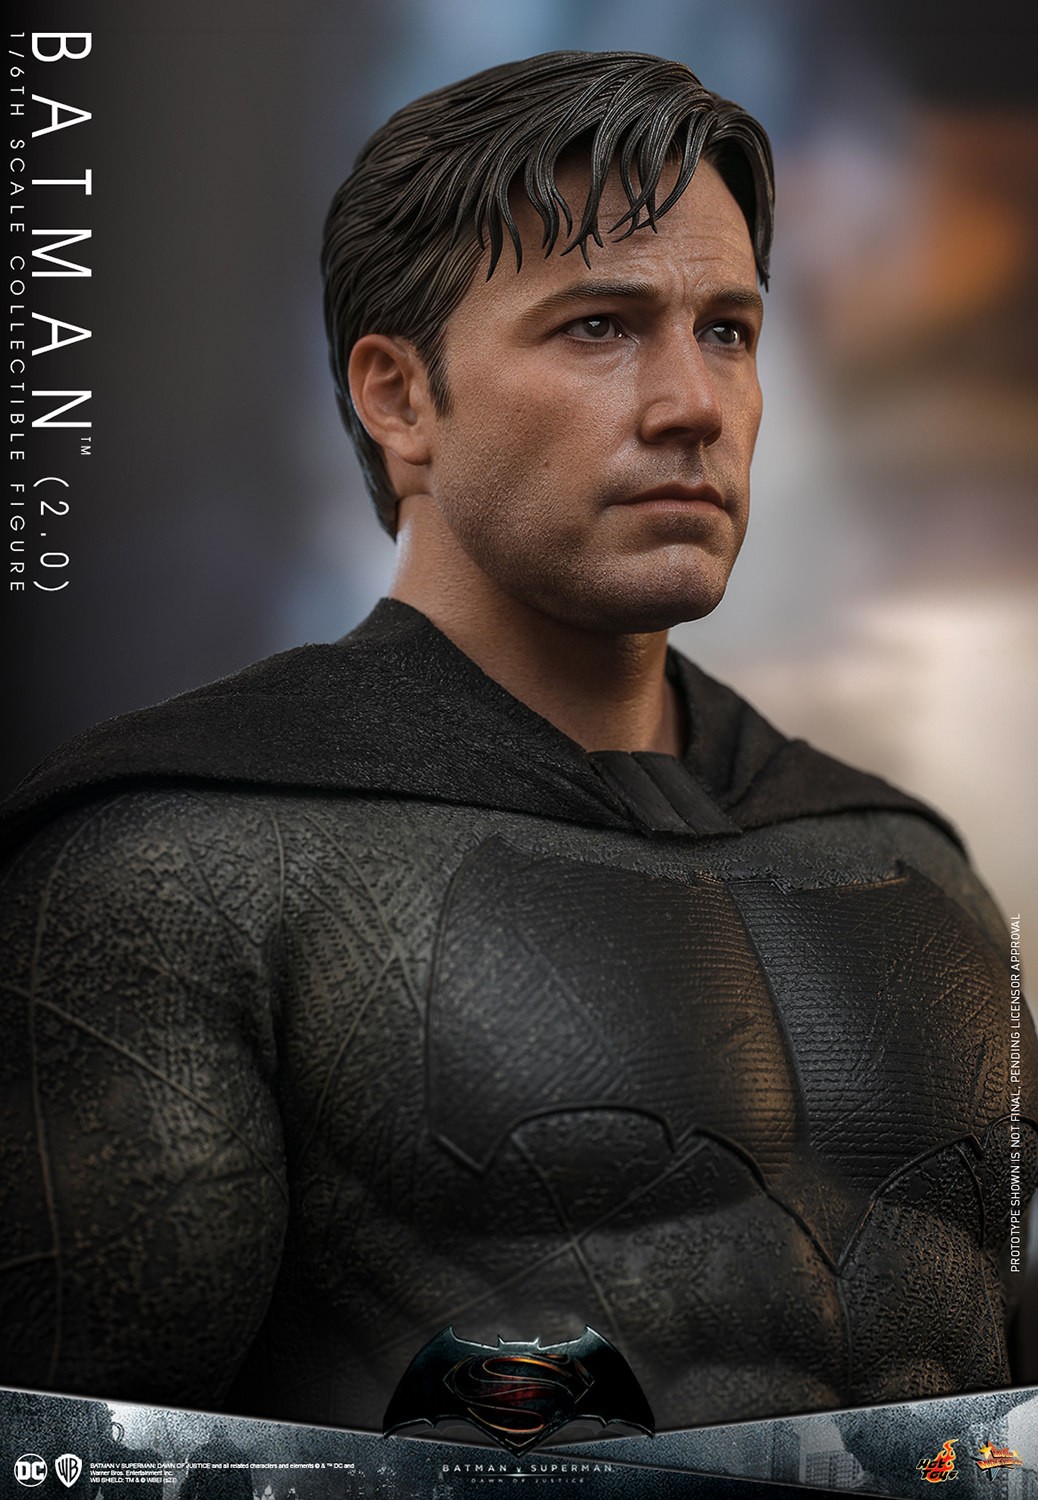 Batman (2.0) Sixth Scale Figure by Hot Toys | Sideshow Collectibles